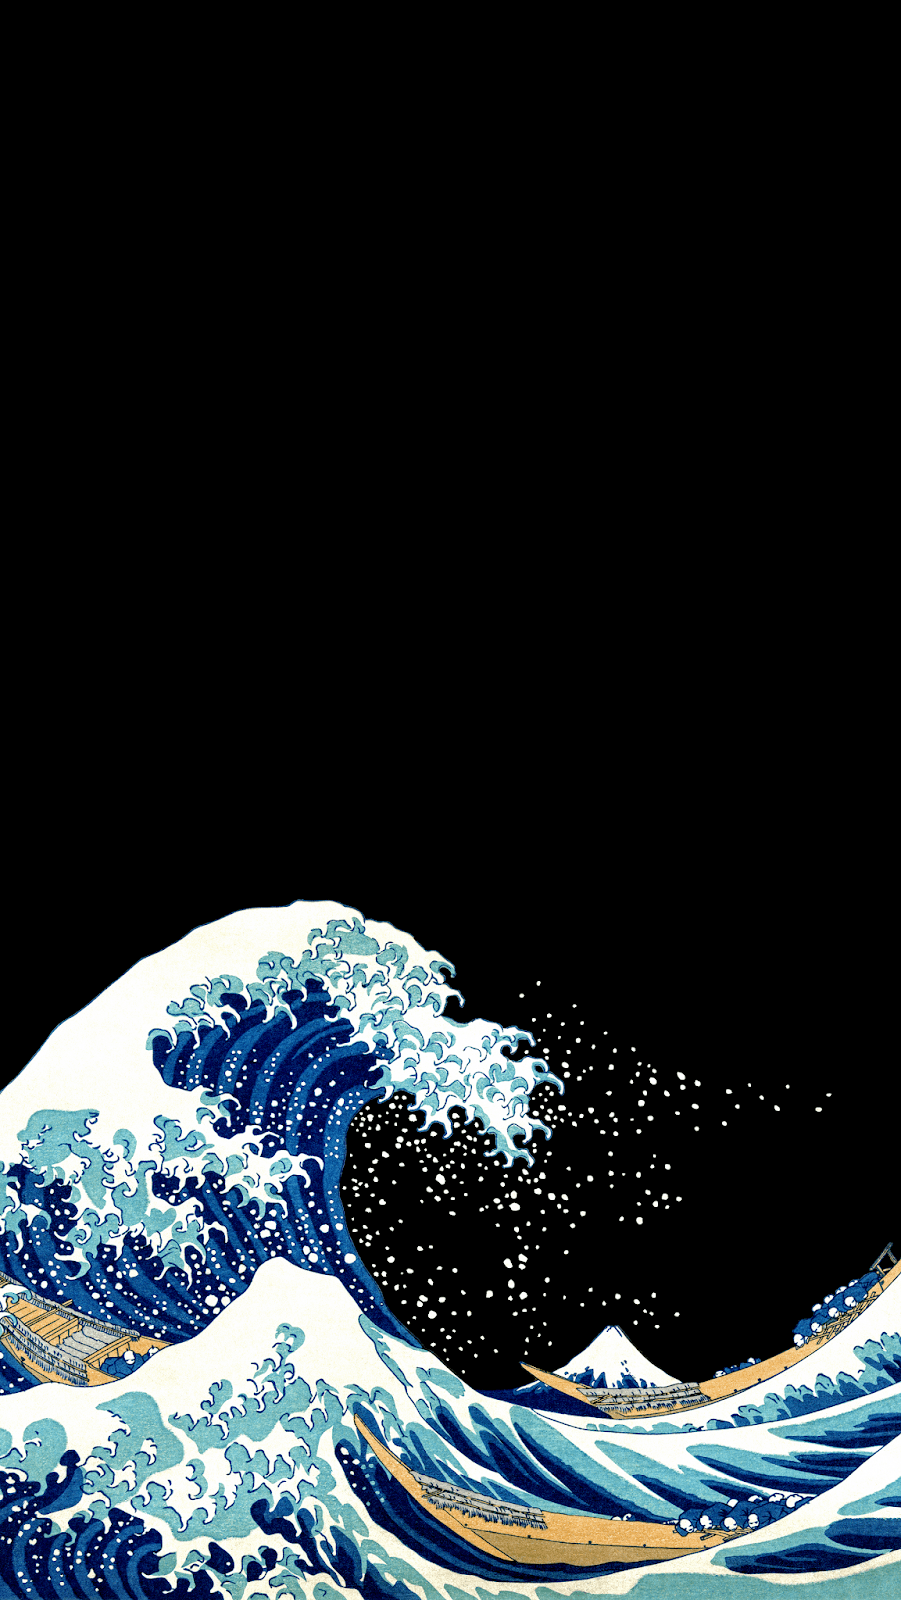 b94wm5z6yx621.png (901×1600). Waves wallpaper iphone, iPhone